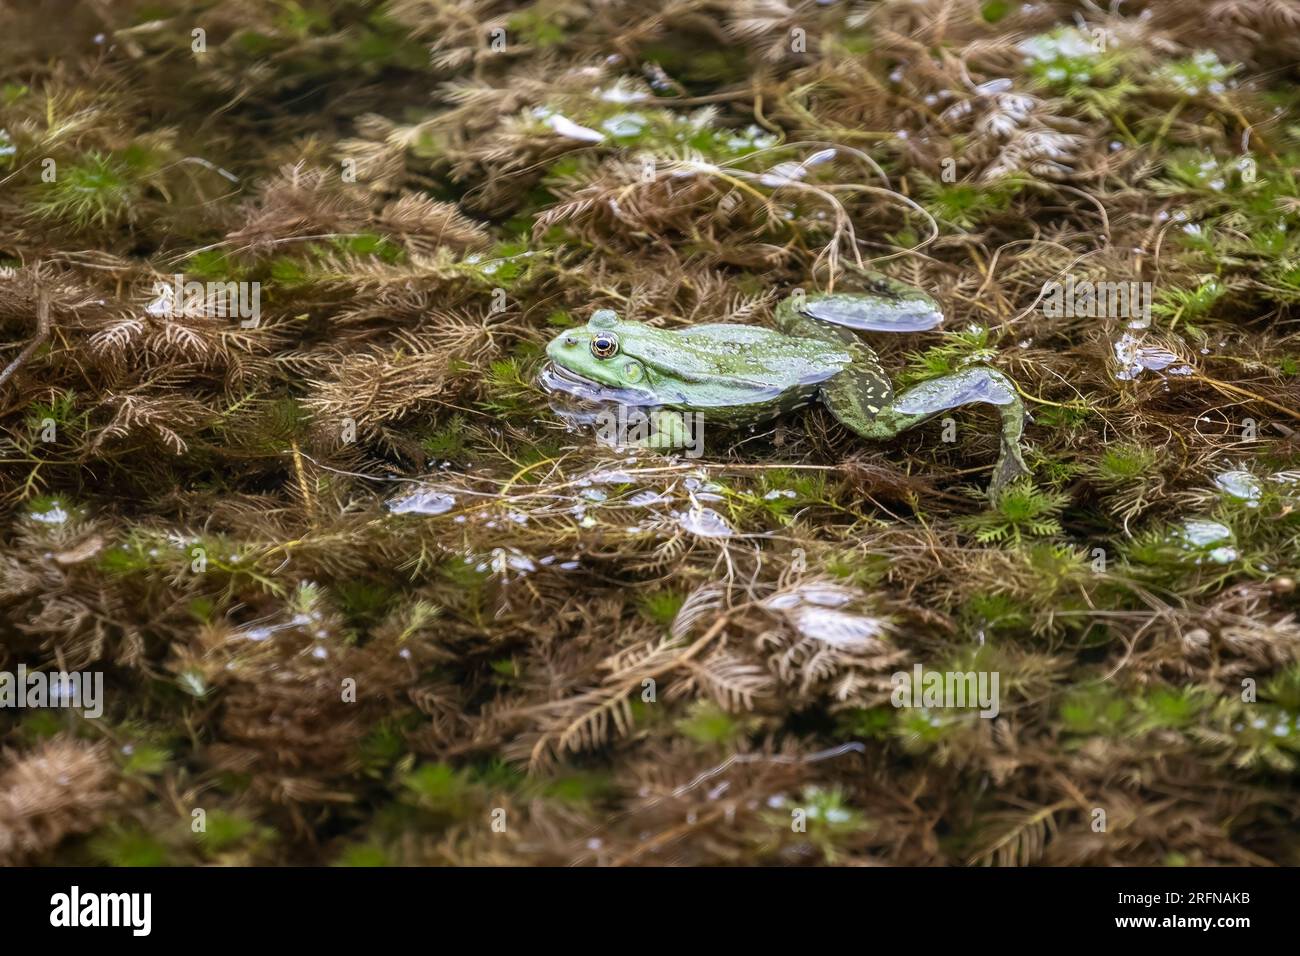 A Marsh frog  Pelophylax ridibundus in a pond with a rounded snout and warty skin that varies from olive to bright green, with irregular dark patches. Stock Photo